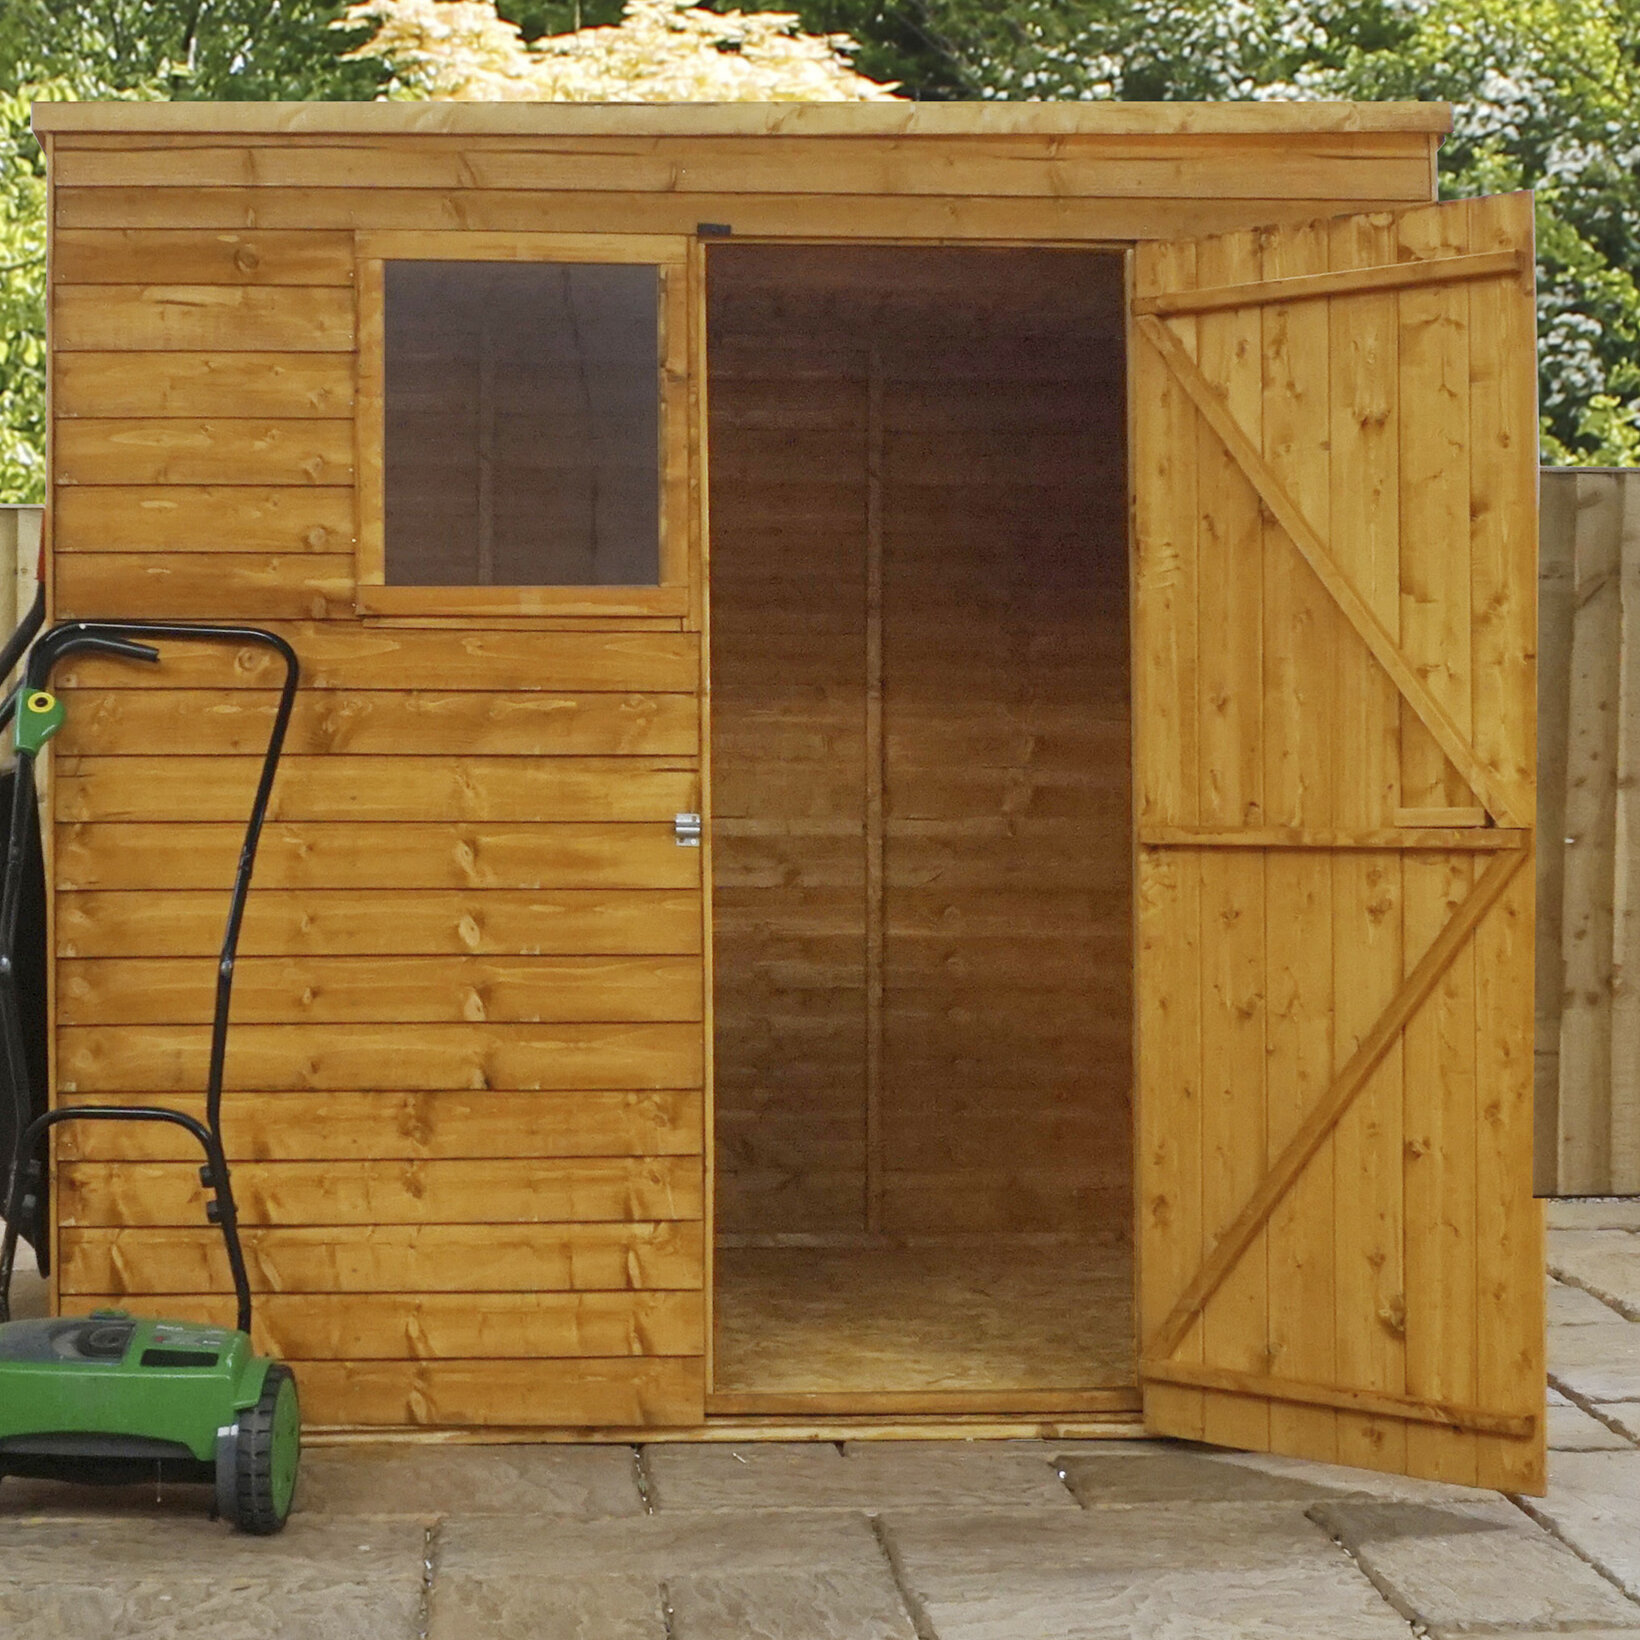 Mercia Garden Products 7 Ft W X 5 Ft D Overlap Pent Wooden Shed